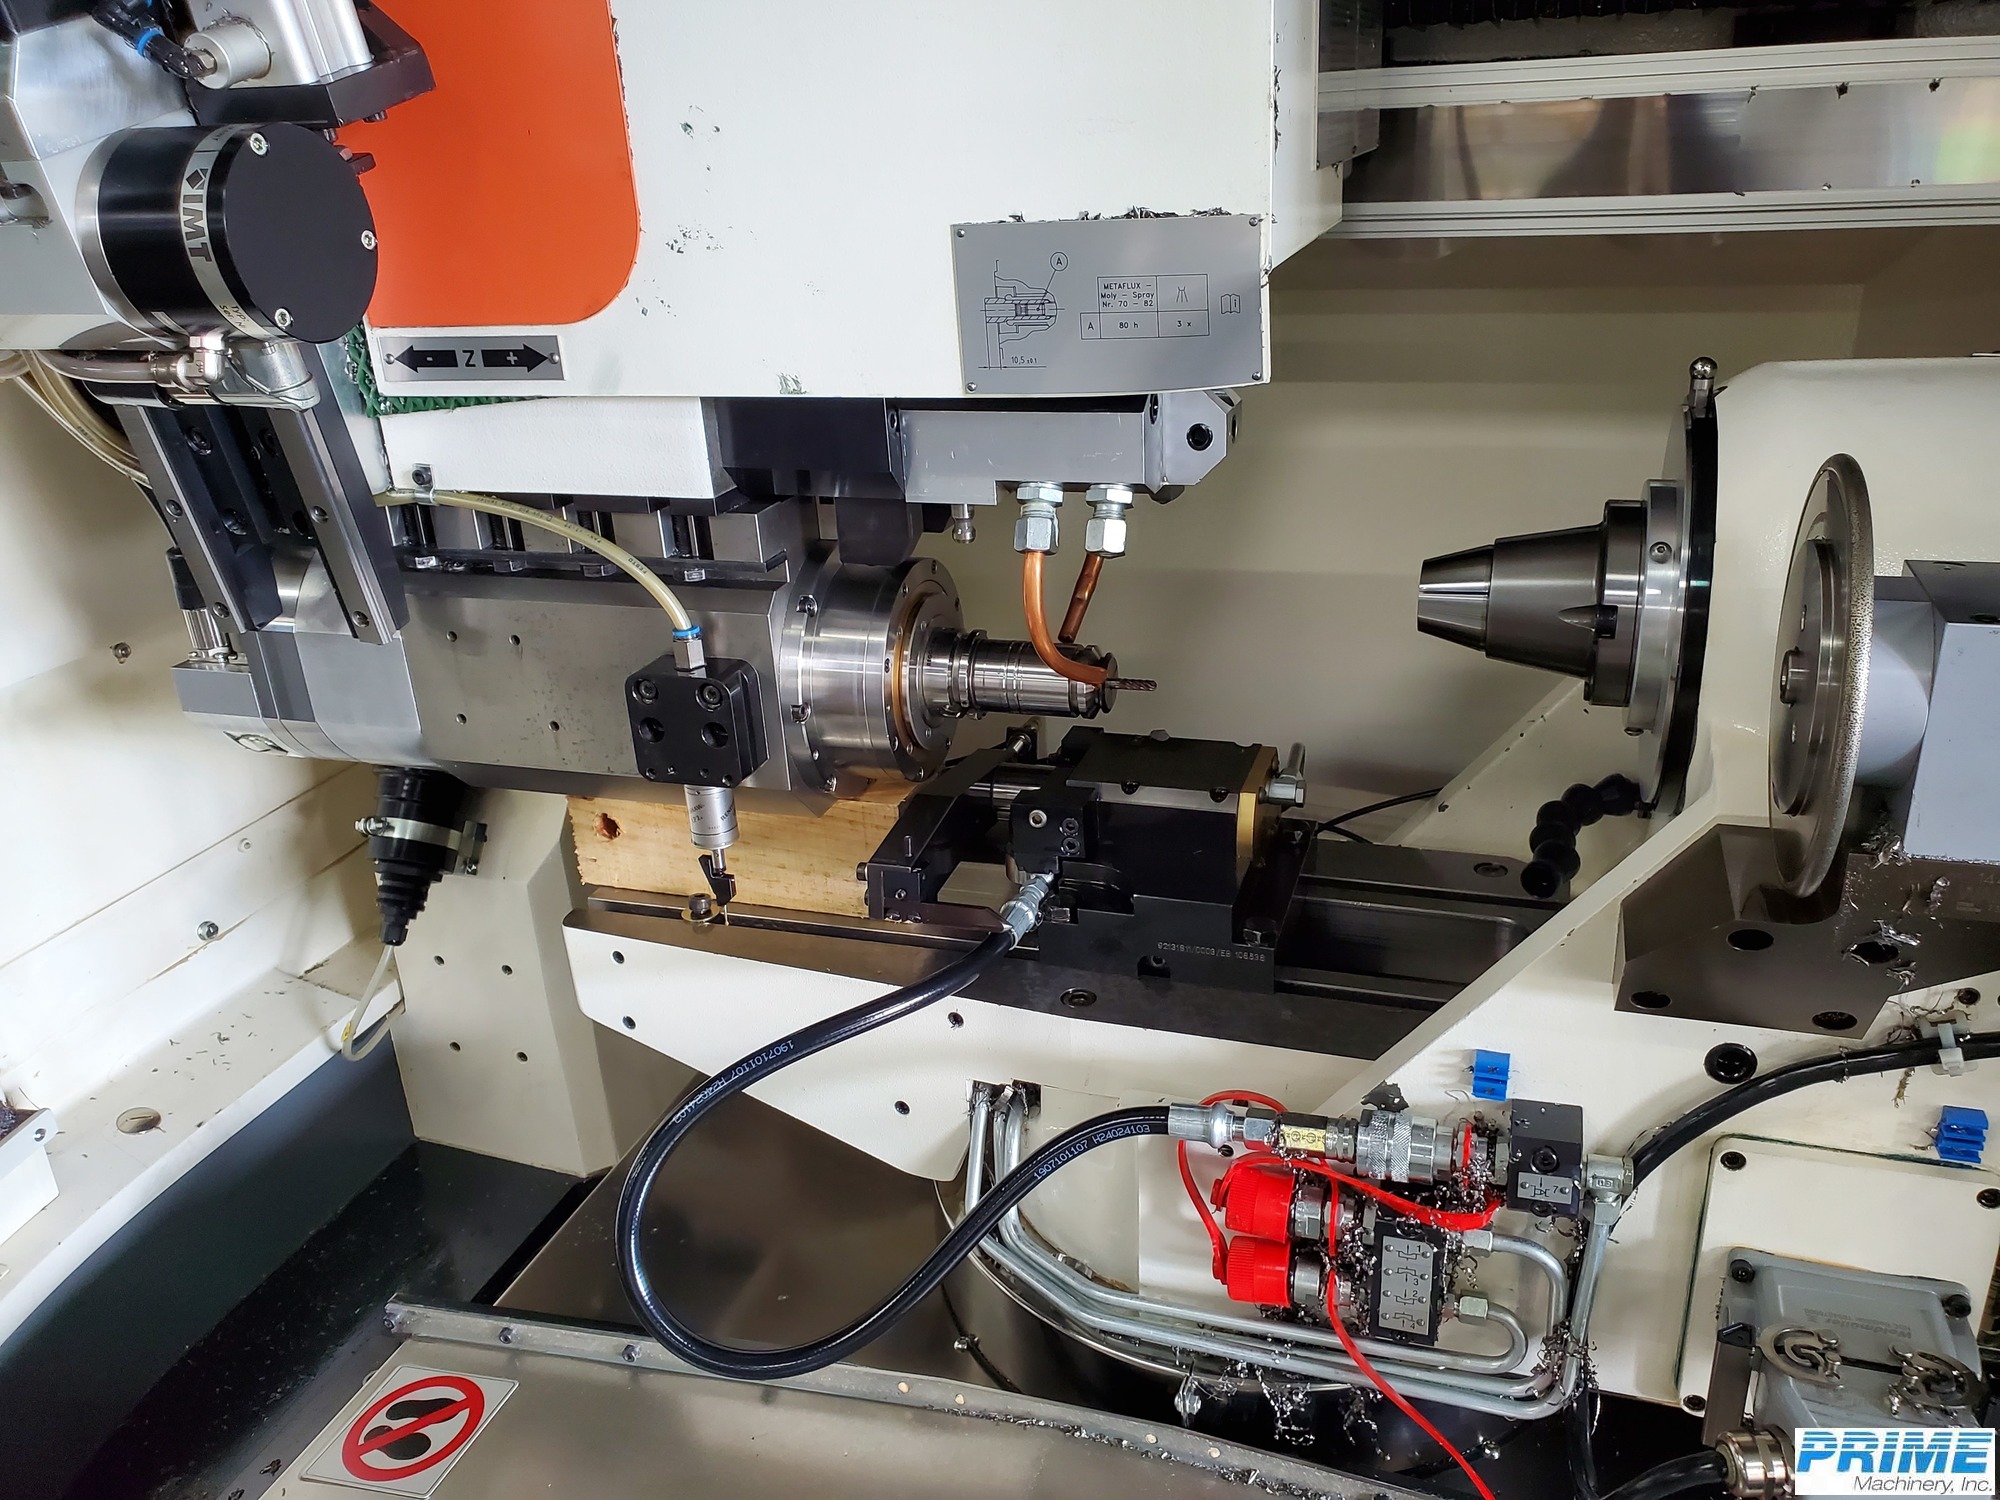 2012 WALTER HELITRONIC VISION GRINDERS, TOOL & CUTTER, N/C & CNC | Prime Machinery